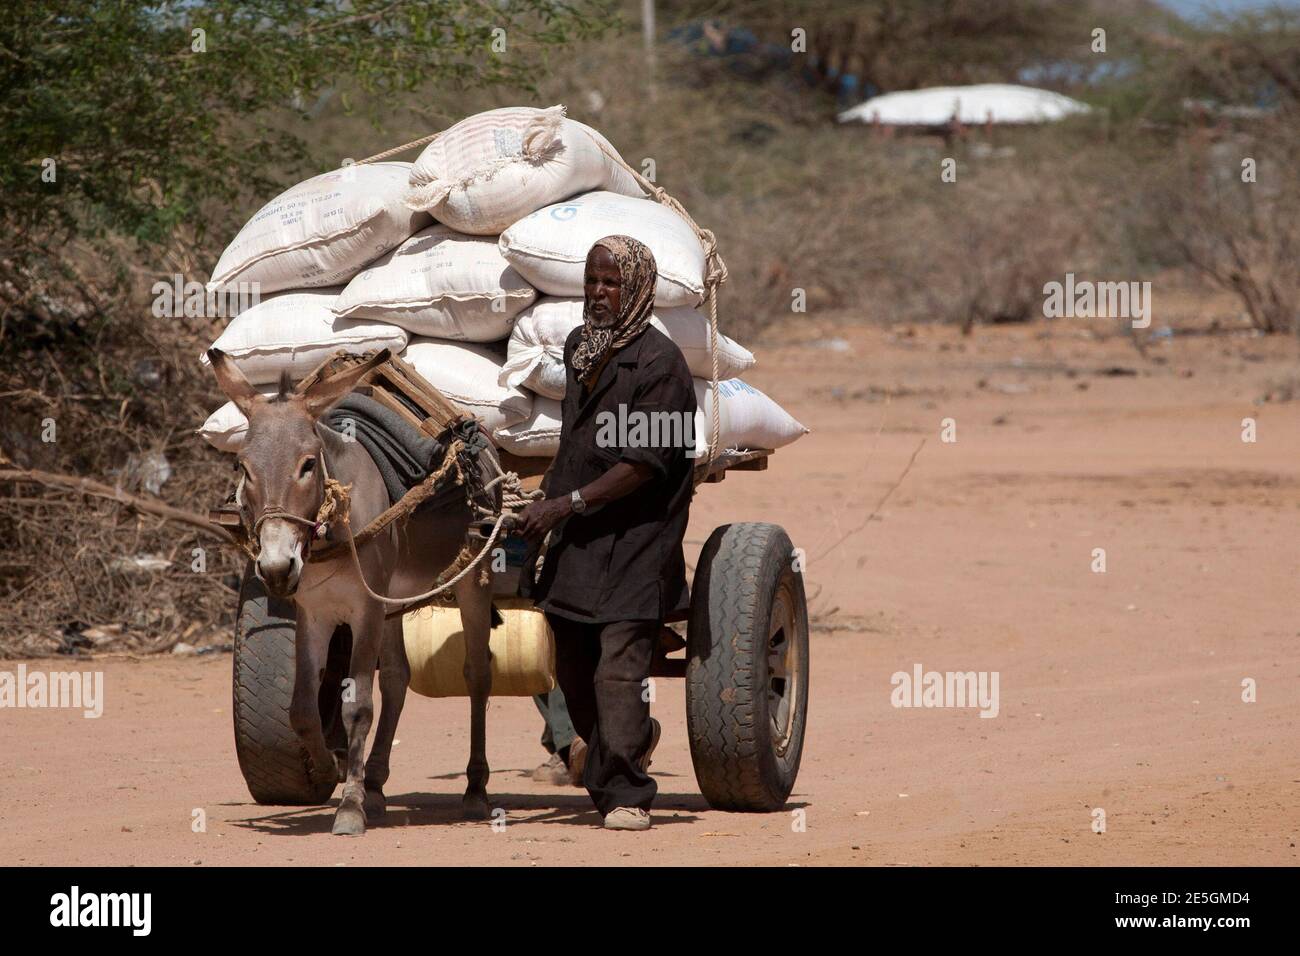 A man carries sacks of food on a cart in Dagahale, one of the several refugee settlements in Dadaab, Garissa County, northeastern Kenya, October 7, 2013.  REUTERS/Siegfried Modola  (KENYA - Tags: SOCIETY POLITICS IMMIGRATION) Stock Photo